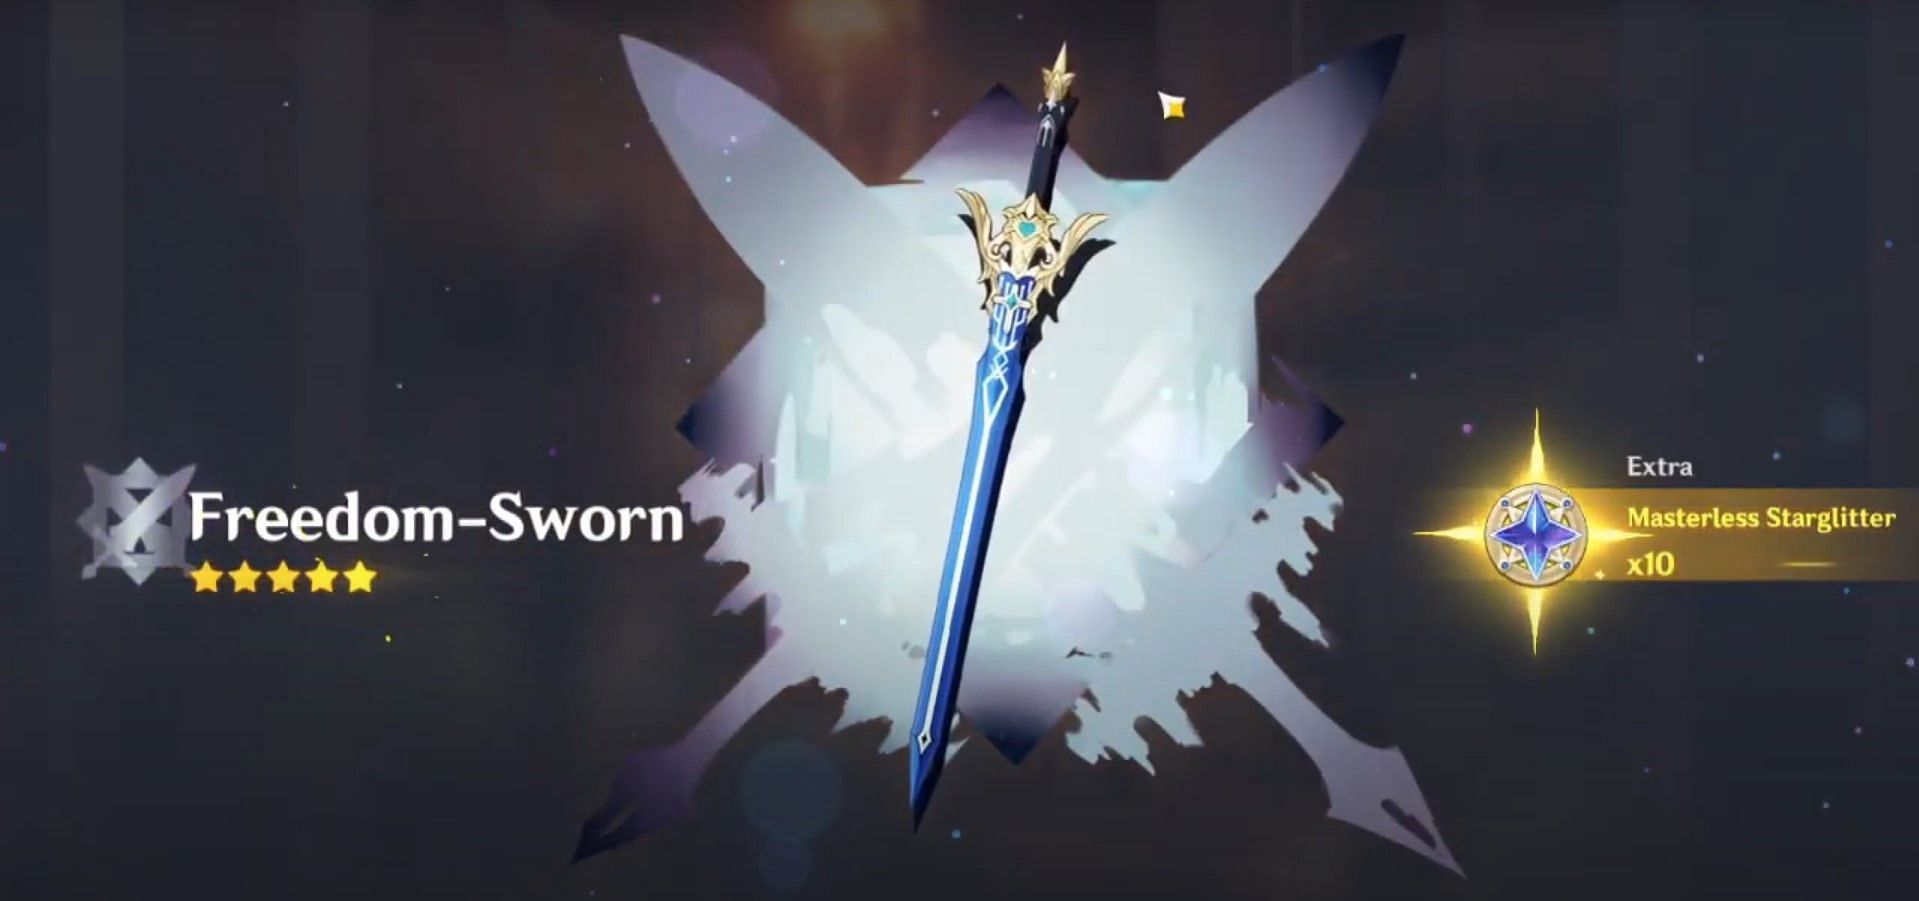 One can get this sword through weapon banners that feature it (Image via Genshin Impact)